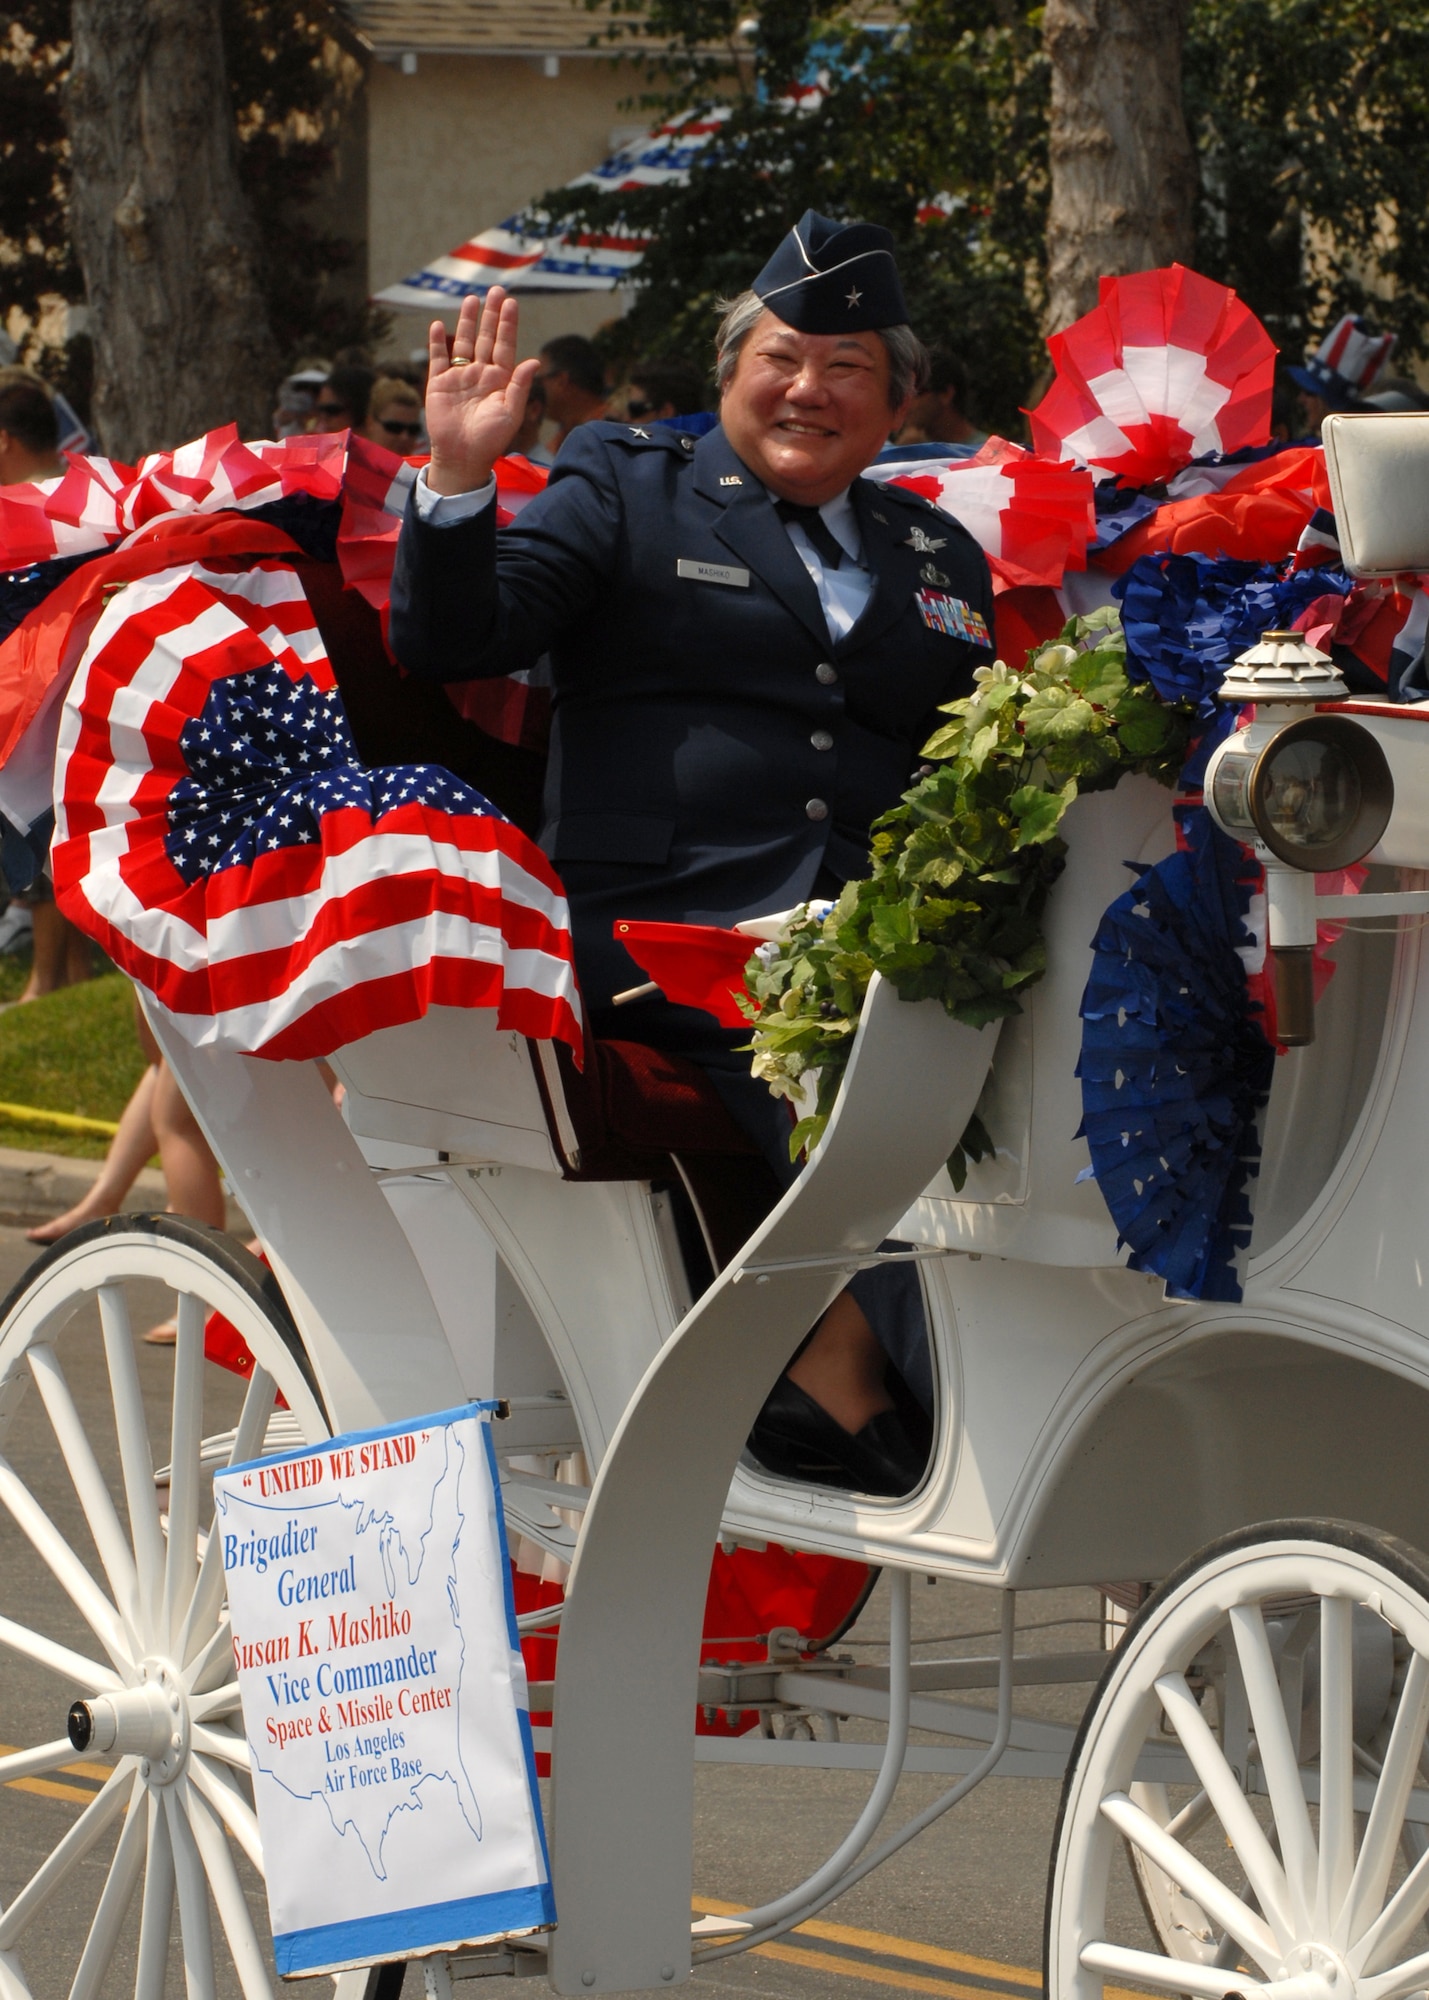 More than 300,000 people lined the streets of Huntington Beach as Brig. Gen. Susan Mashiko, Space and Missile Systems Center vice commander, represents Los Angeles Air Force Base at the city's Fourth of July parade.  (Photo by Steven Schester)